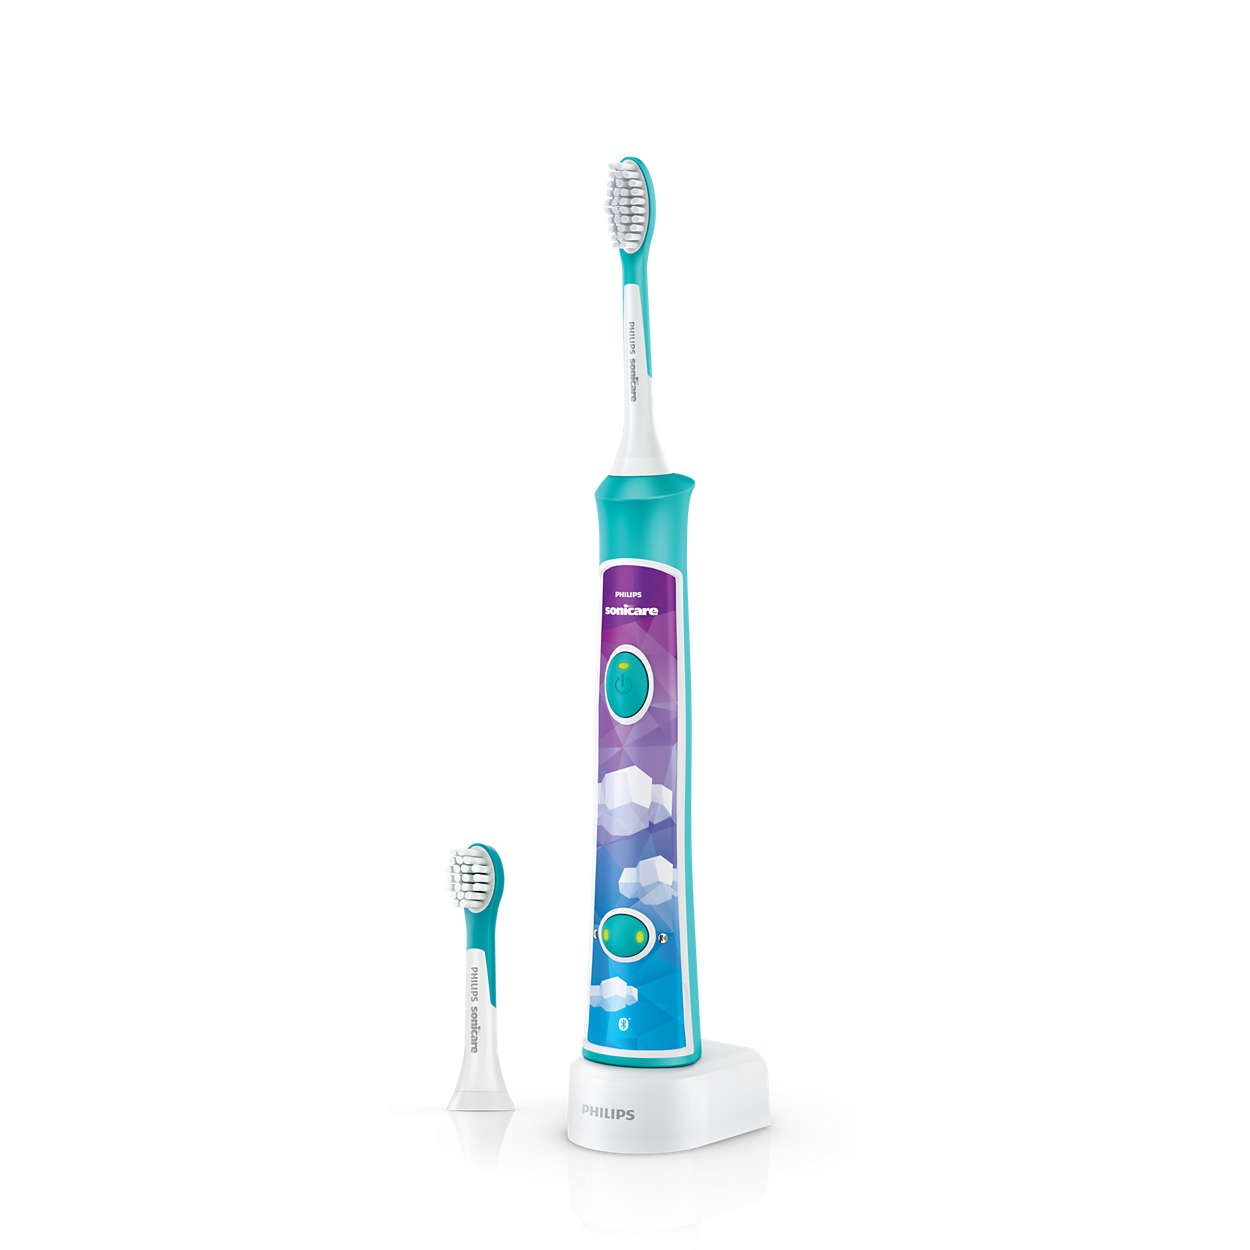 Sonicare Connected Electric Toothbrush HX6322/04 User Manual